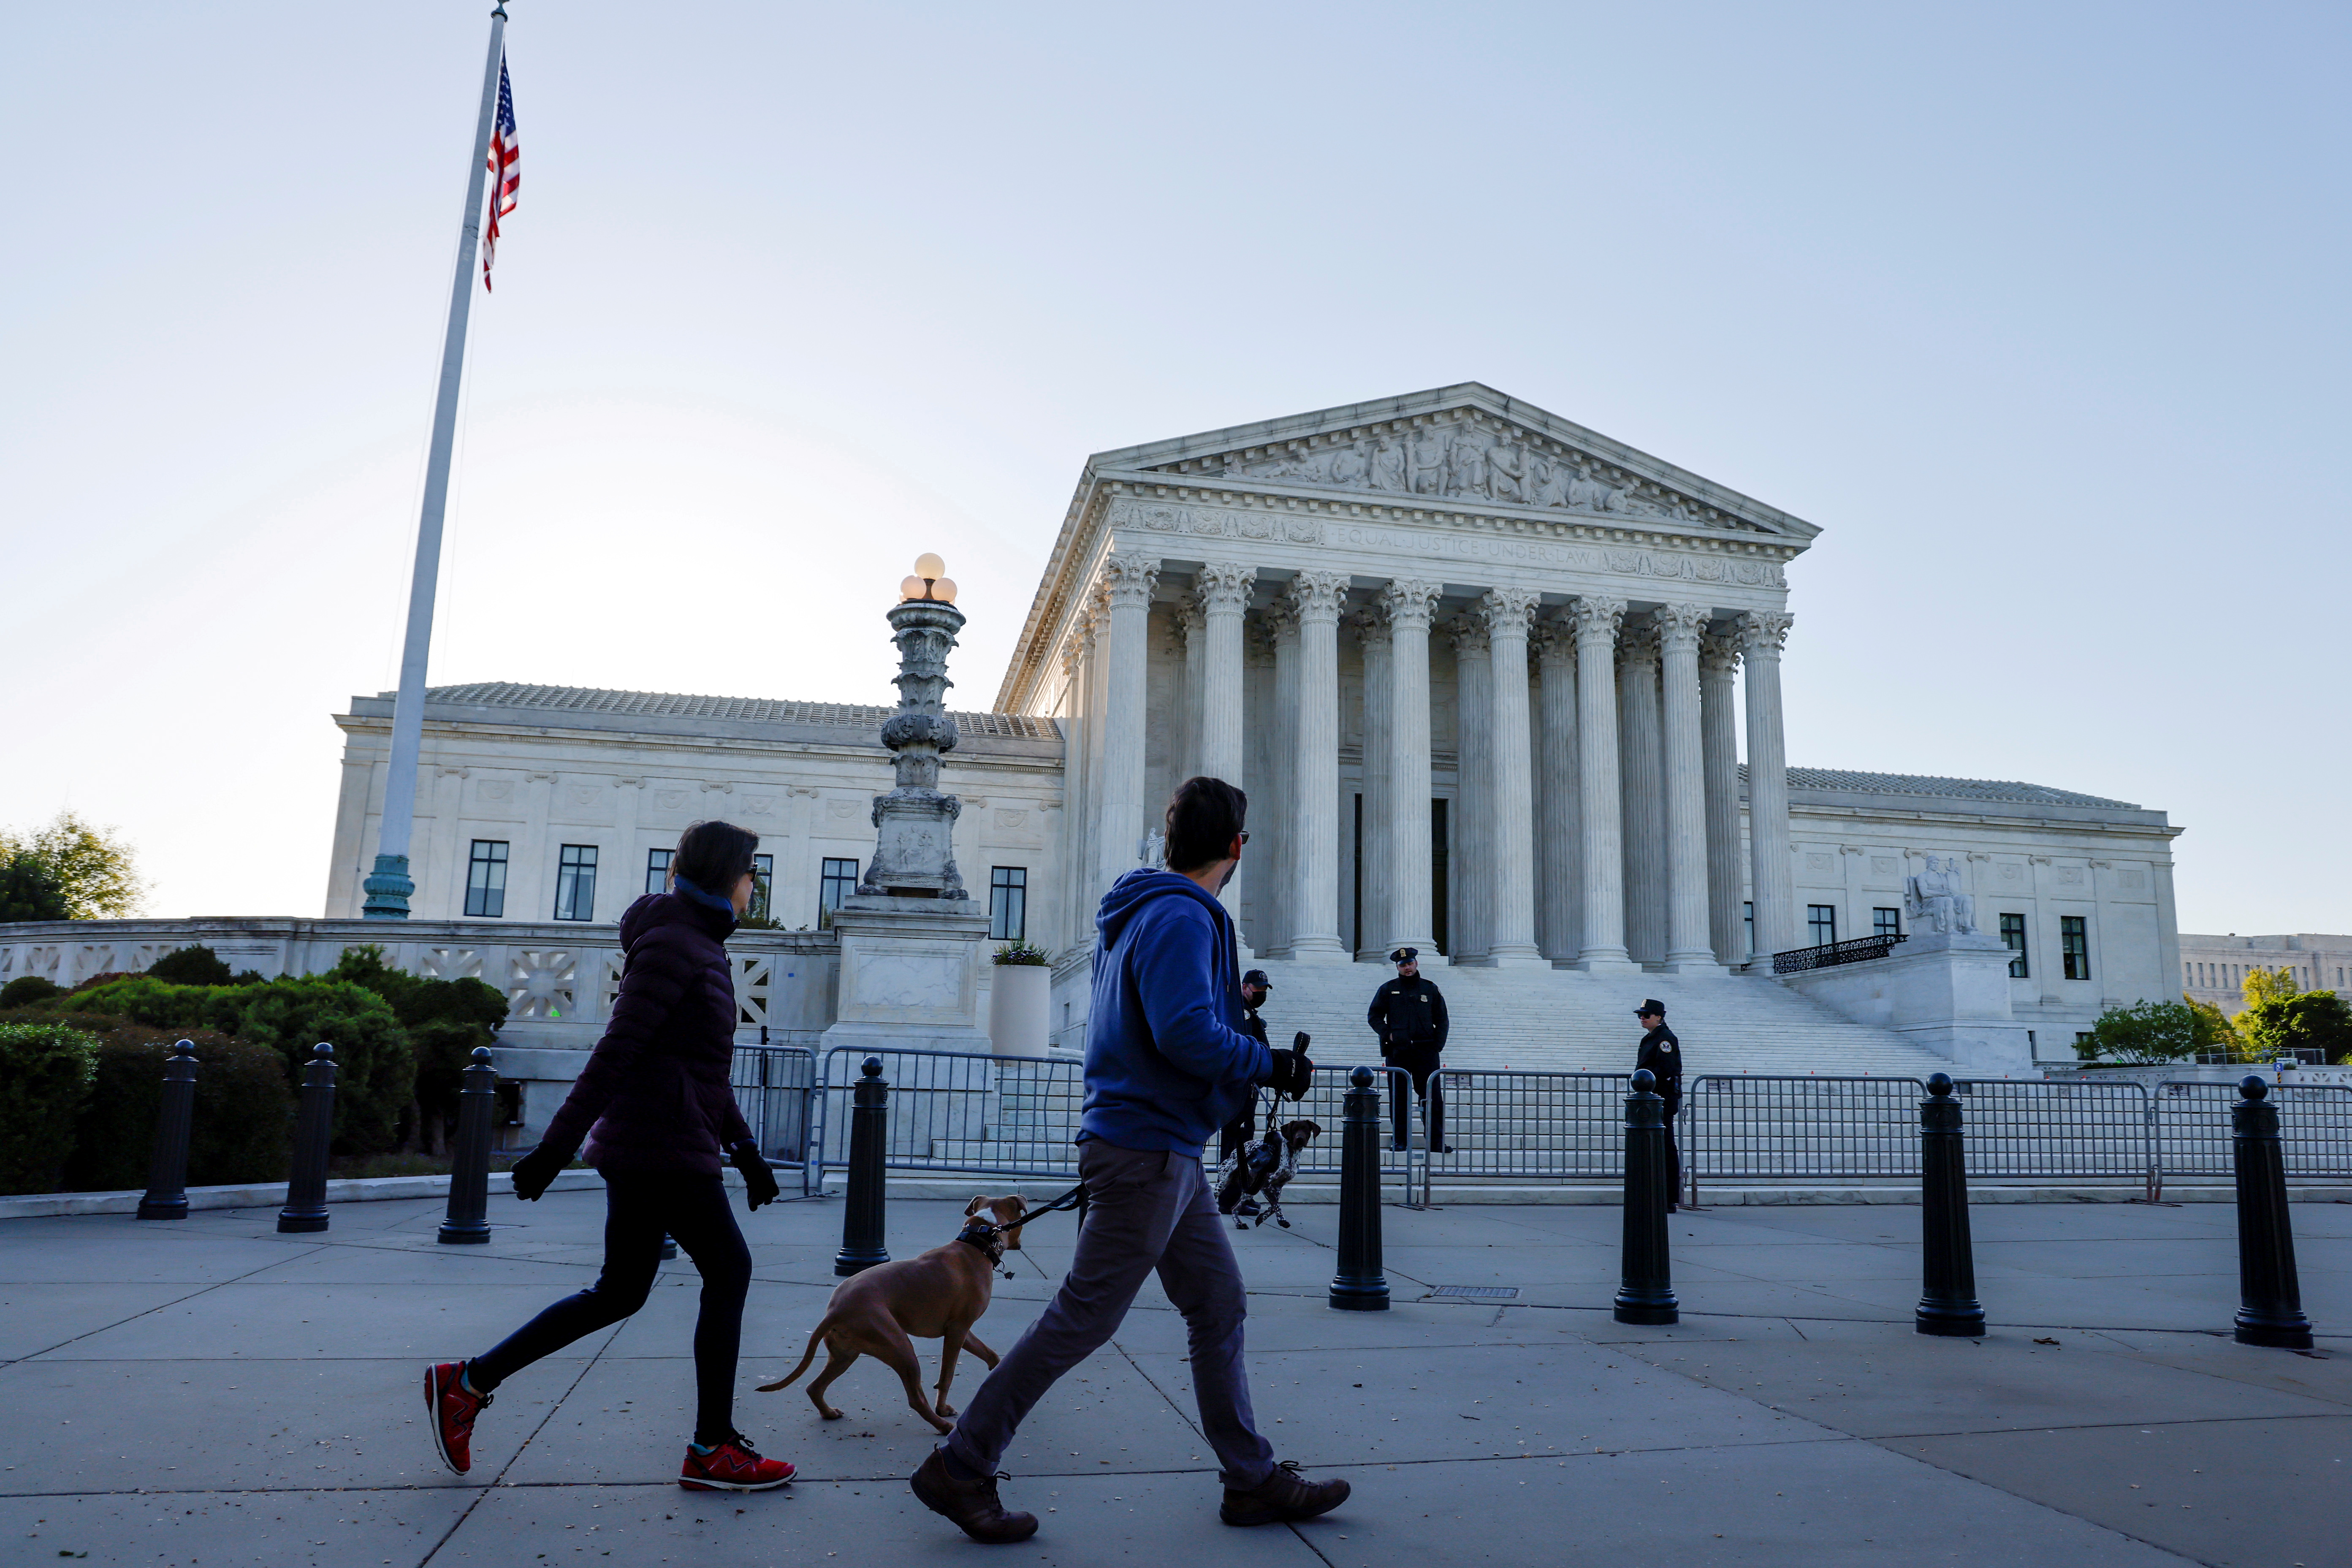 Morning rises over the U.S. Supreme Court building in Washington